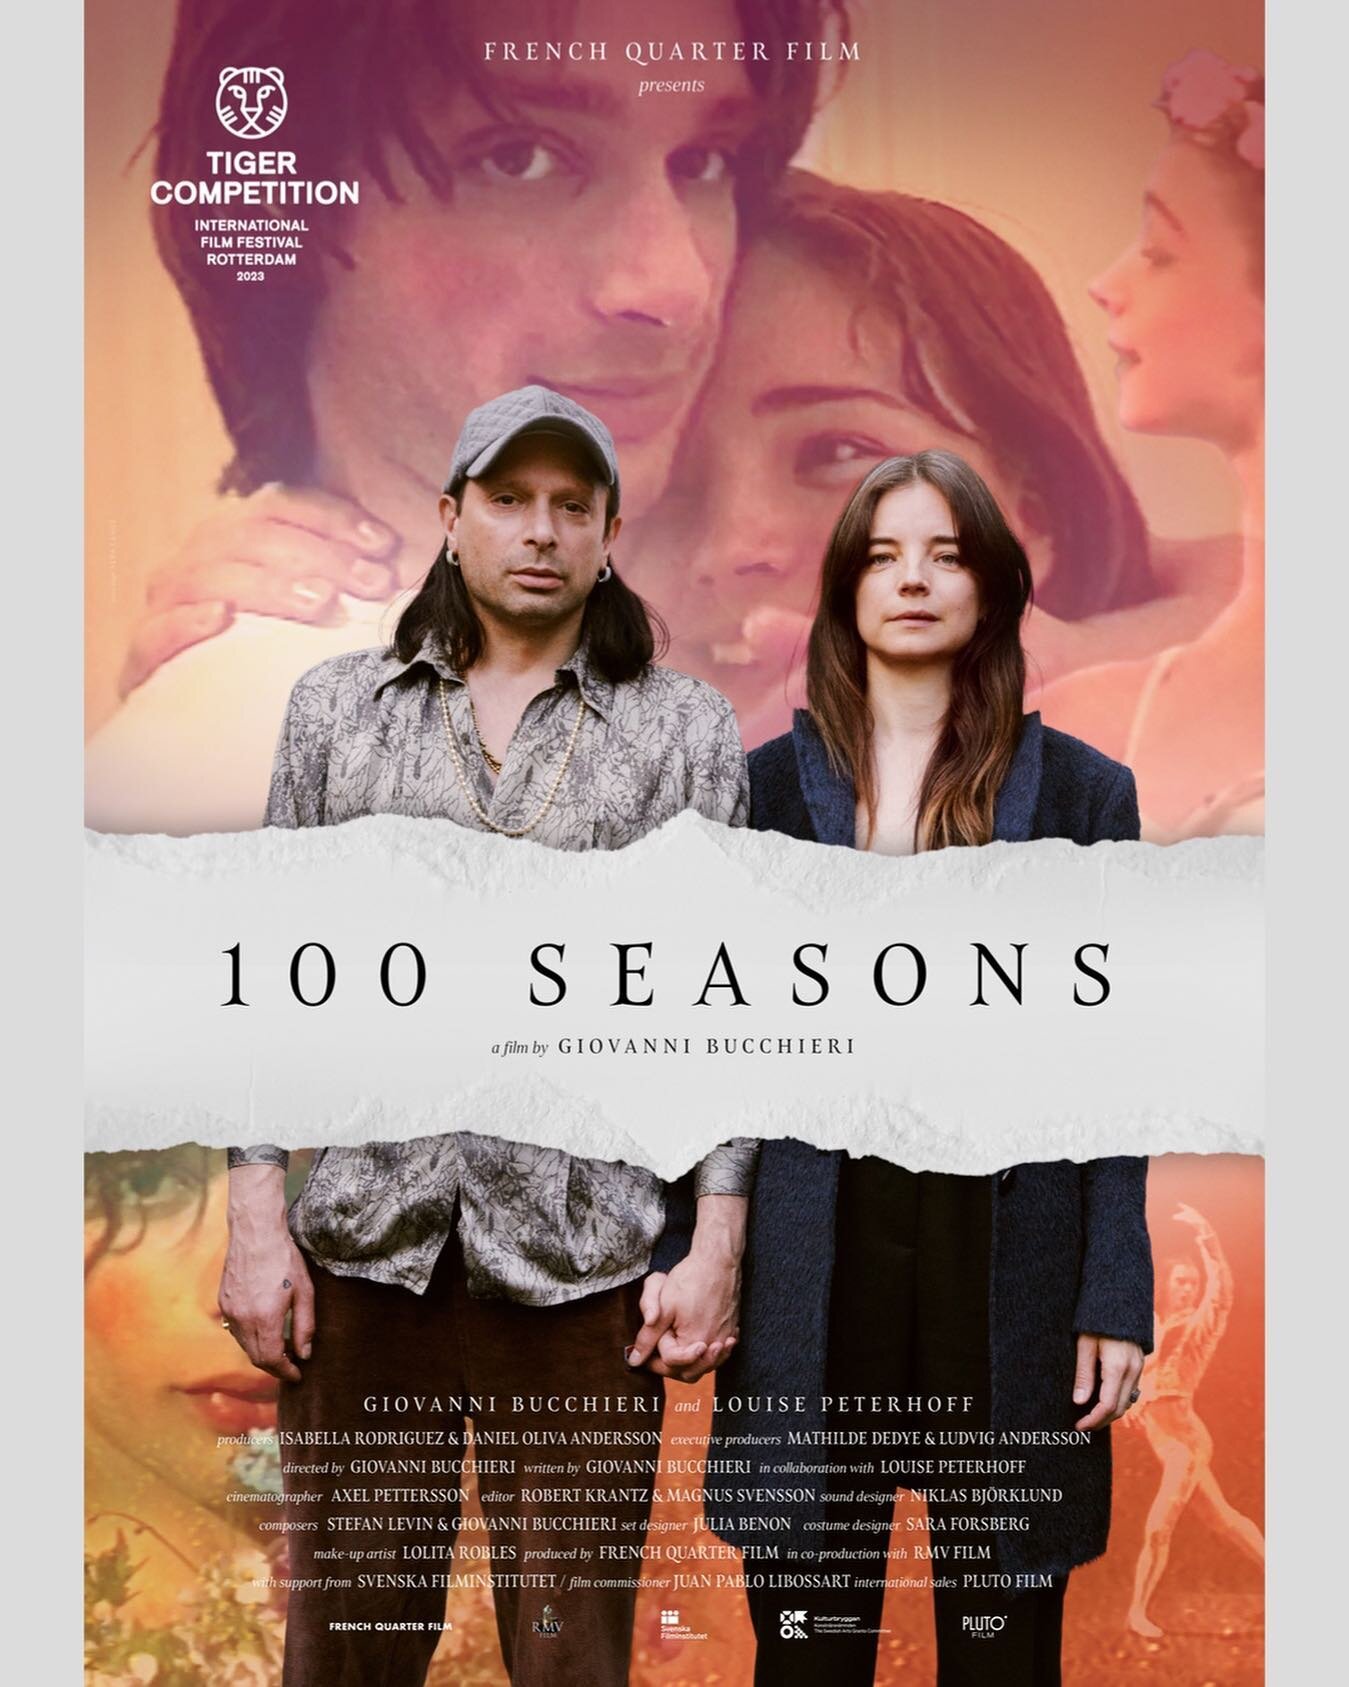 100 Seasons had a fantastic world premiere in Rotterdam last night!! There wasn&rsquo;t a dry eye in the house ❤️
Poster design by @albalangedesign